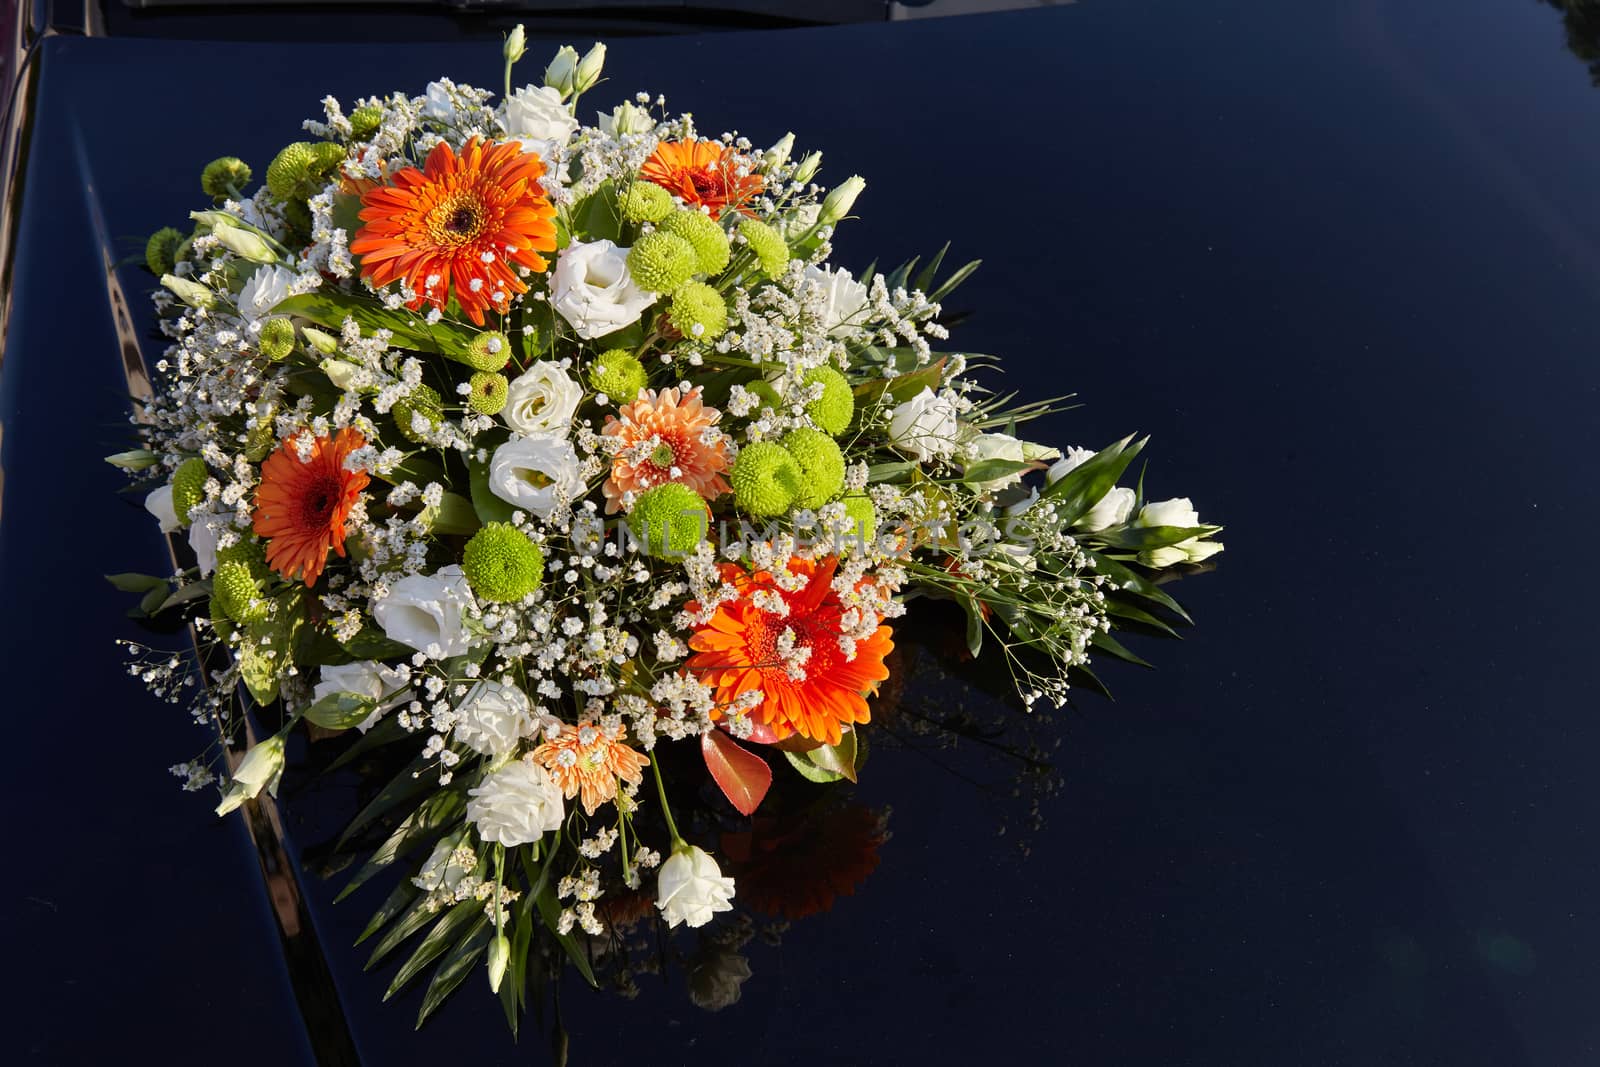 The wedding car decorated with flowers